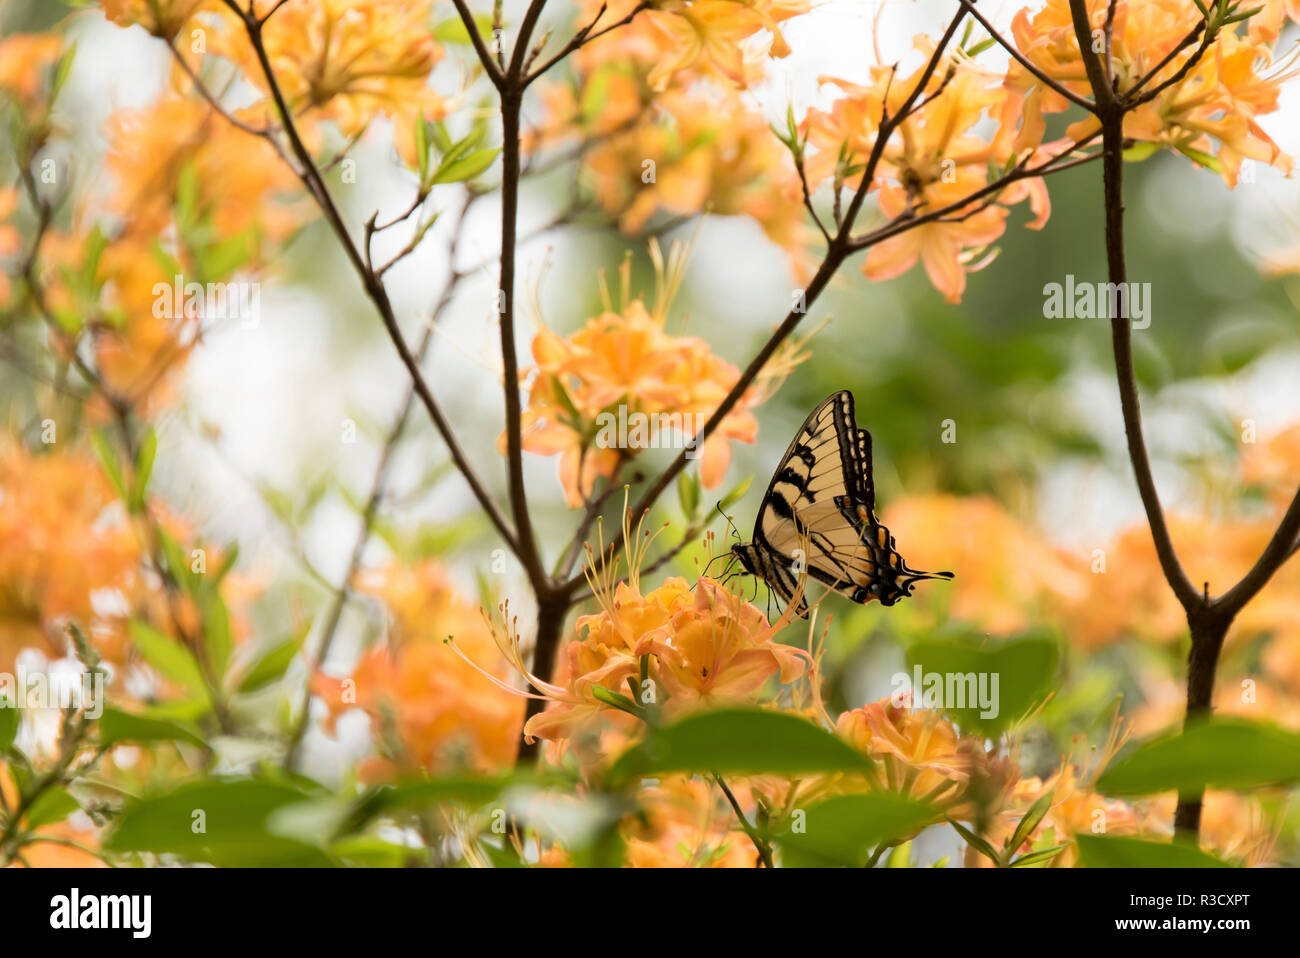 USA, Tennessee, Great Smoky Mountains National Park Tiger Swallowtail butterfly (Papilio appalachiensis) on Flame Azalea (Rhododendron calendulaceum) Stock Photo